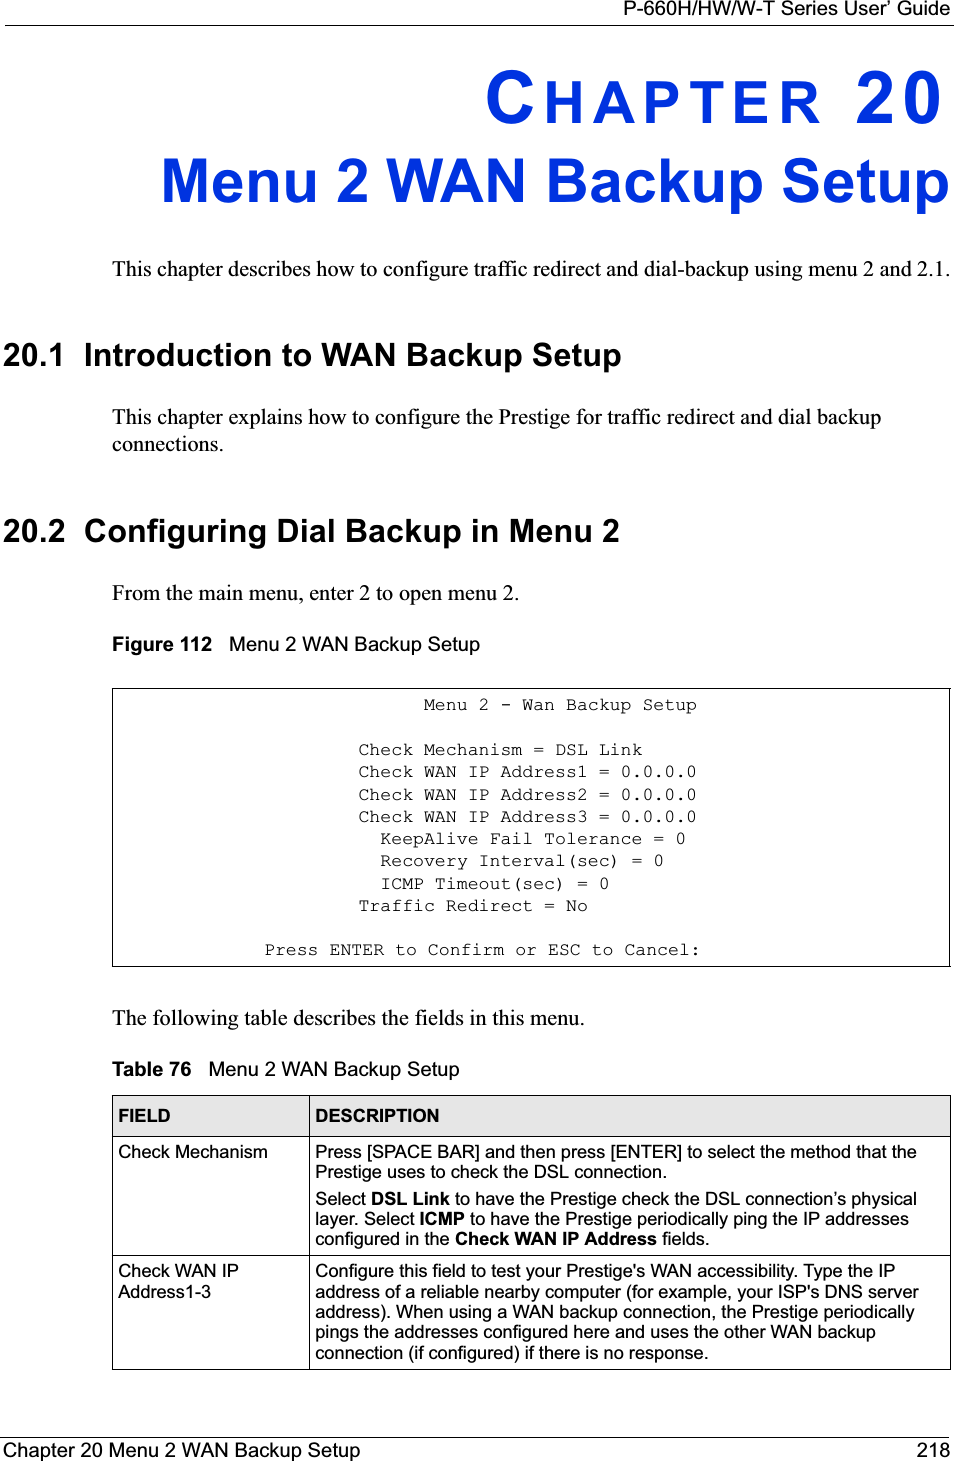 P-660H/HW/W-T Series User’ GuideChapter 20 Menu 2 WAN Backup Setup 218CHAPTER 20Menu 2 WAN Backup SetupThis chapter describes how to configure traffic redirect and dial-backup using menu 2 and 2.1.20.1  Introduction to WAN Backup SetupThis chapter explains how to configure the Prestige for traffic redirect and dial backup connections.20.2  Configuring Dial Backup in Menu 2From the main menu, enter 2 to open menu 2.Figure 112   Menu 2 WAN Backup SetupThe following table describes the fields in this menu.                            Menu 2 - Wan Backup Setup                      Check Mechanism = DSL Link                      Check WAN IP Address1 = 0.0.0.0                      Check WAN IP Address2 = 0.0.0.0                      Check WAN IP Address3 = 0.0.0.0                        KeepAlive Fail Tolerance = 0                        Recovery Interval(sec) = 0                        ICMP Timeout(sec) = 0                      Traffic Redirect = No              Press ENTER to Confirm or ESC to Cancel:Table 76   Menu 2 WAN Backup SetupFIELD DESCRIPTIONCheck Mechanism Press [SPACE BAR] and then press [ENTER] to select the method that the Prestige uses to check the DSL connection.Select DSL Link to have the Prestige check the DSL connection’s physical layer. Select ICMP to have the Prestige periodically ping the IP addresses configured in the Check WAN IP Address fields.Check WAN IP Address1-3Configure this field to test your Prestige&apos;s WAN accessibility. Type the IP address of a reliable nearby computer (for example, your ISP&apos;s DNS server address). When using a WAN backup connection, the Prestige periodically pings the addresses configured here and uses the other WAN backup connection (if configured) if there is no response.